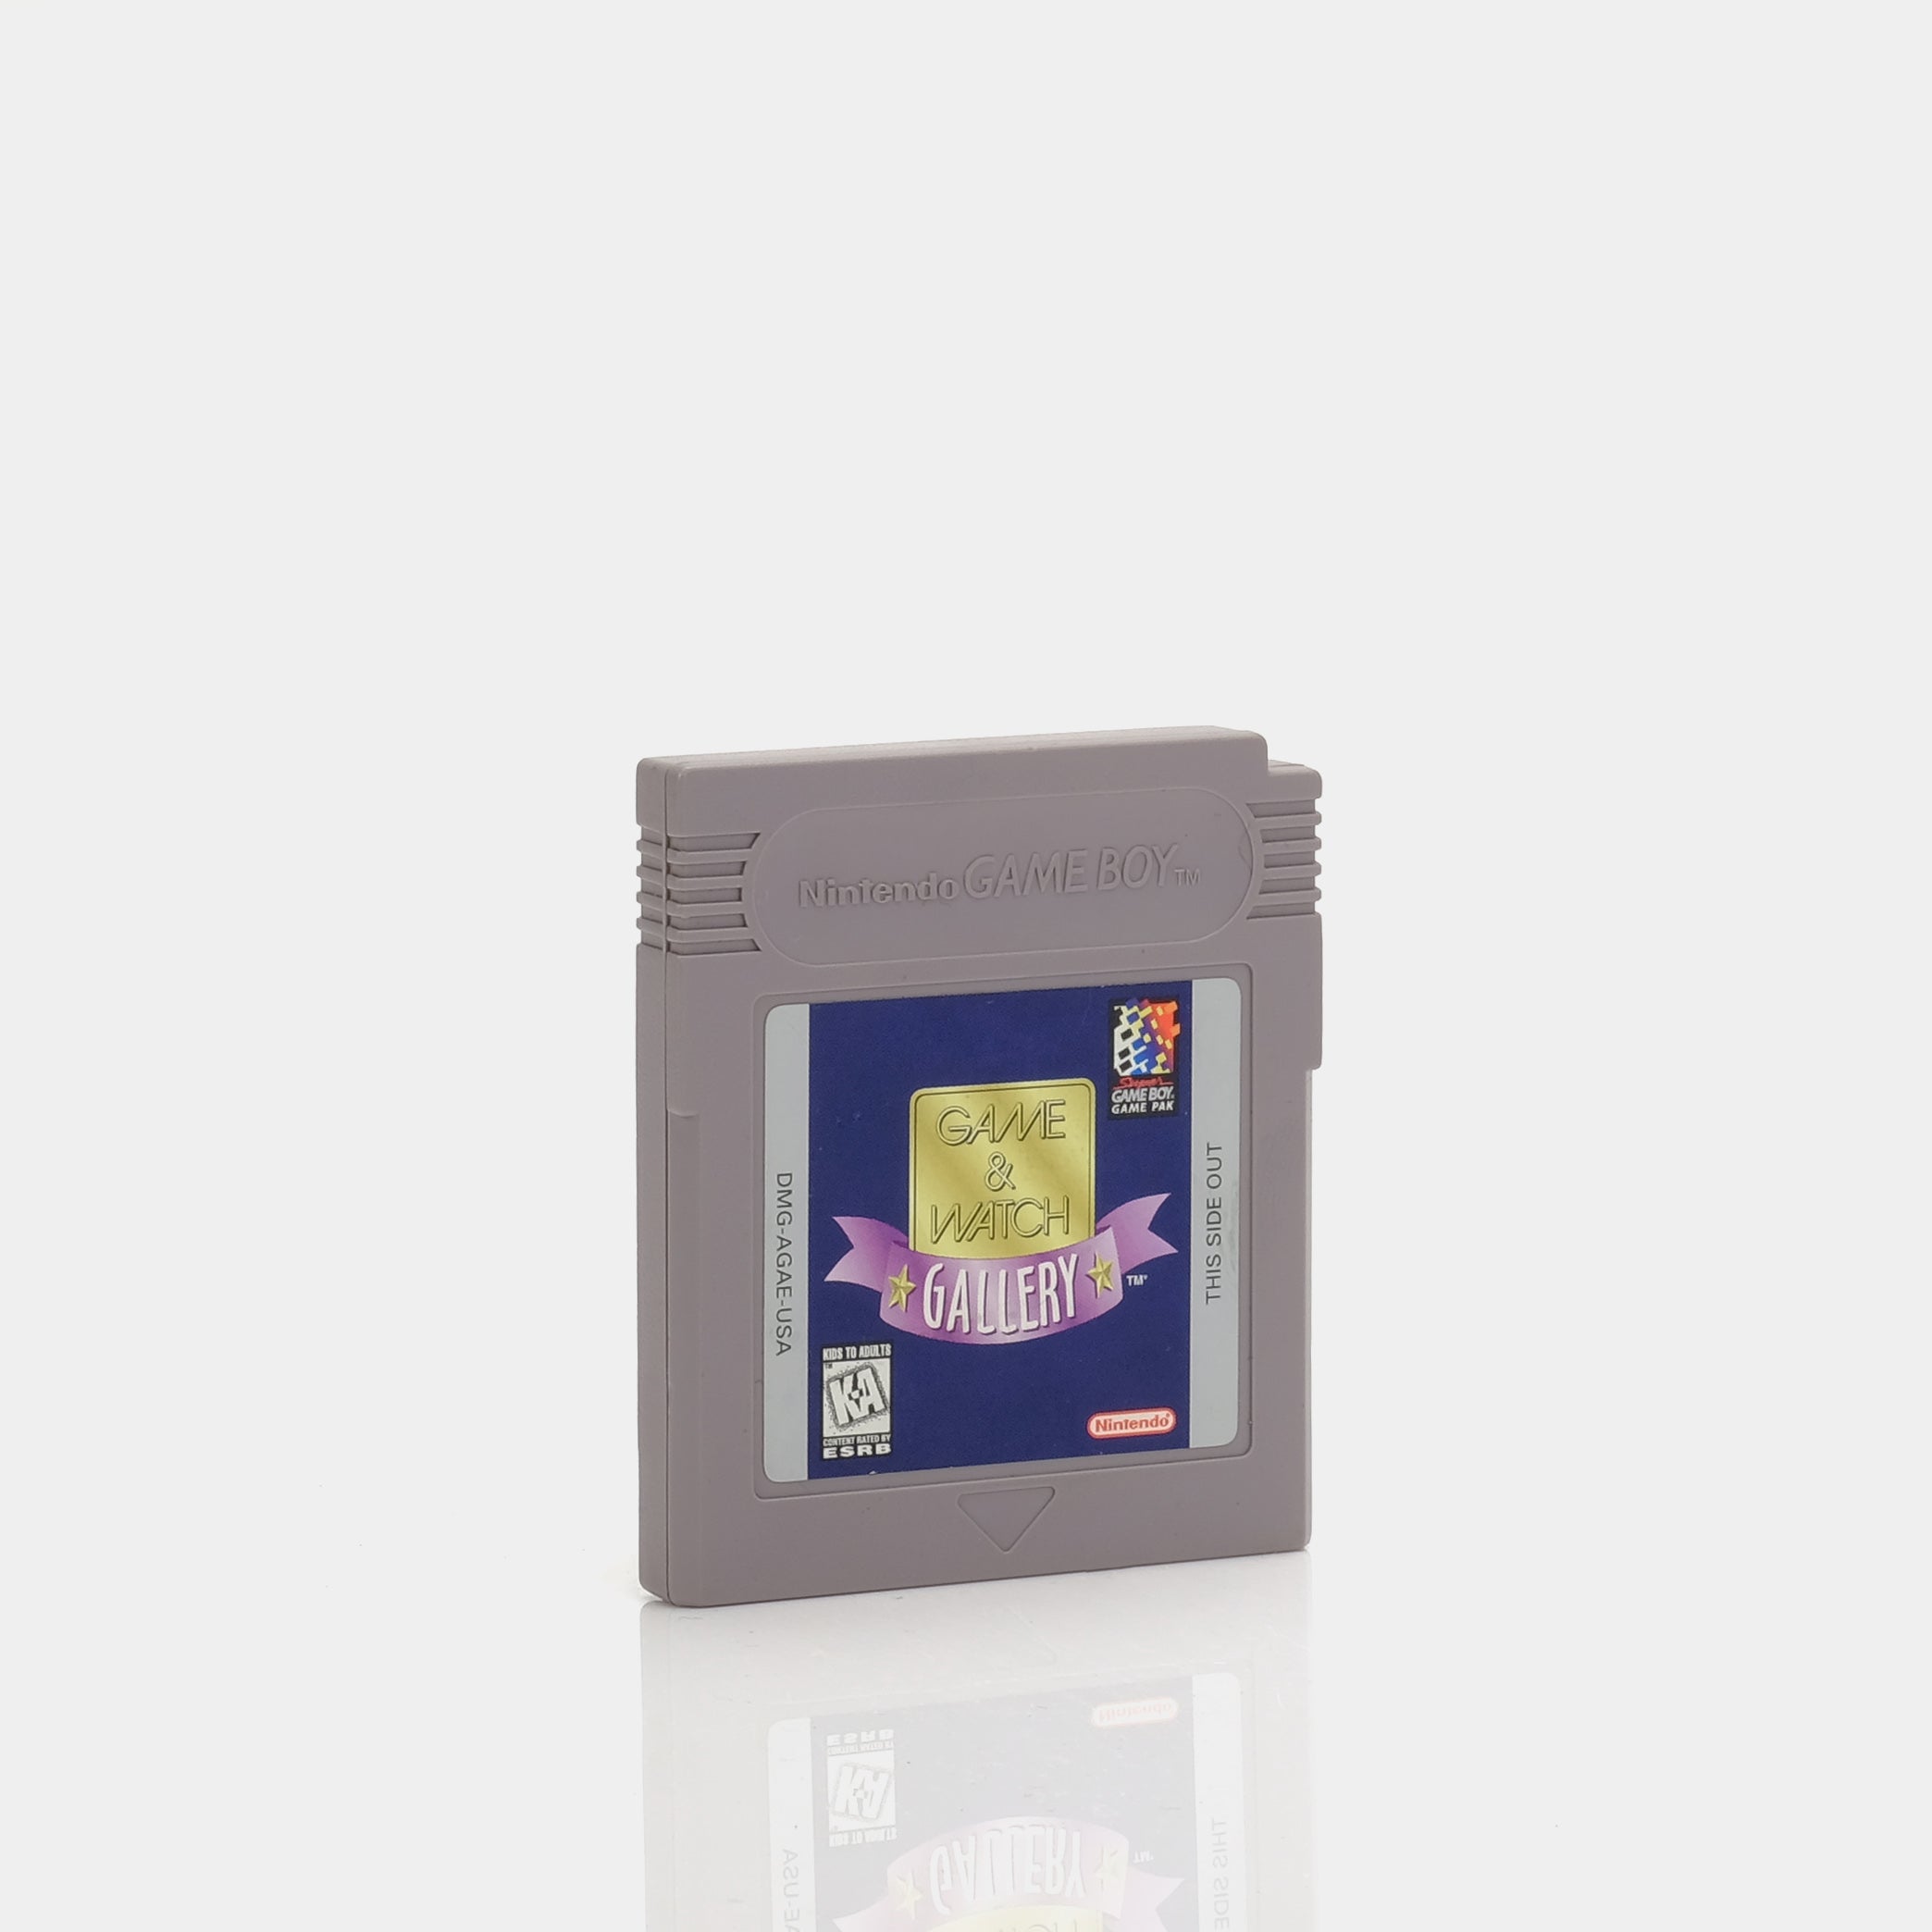 Game & Watch Gallery (1997) Game Boy Game